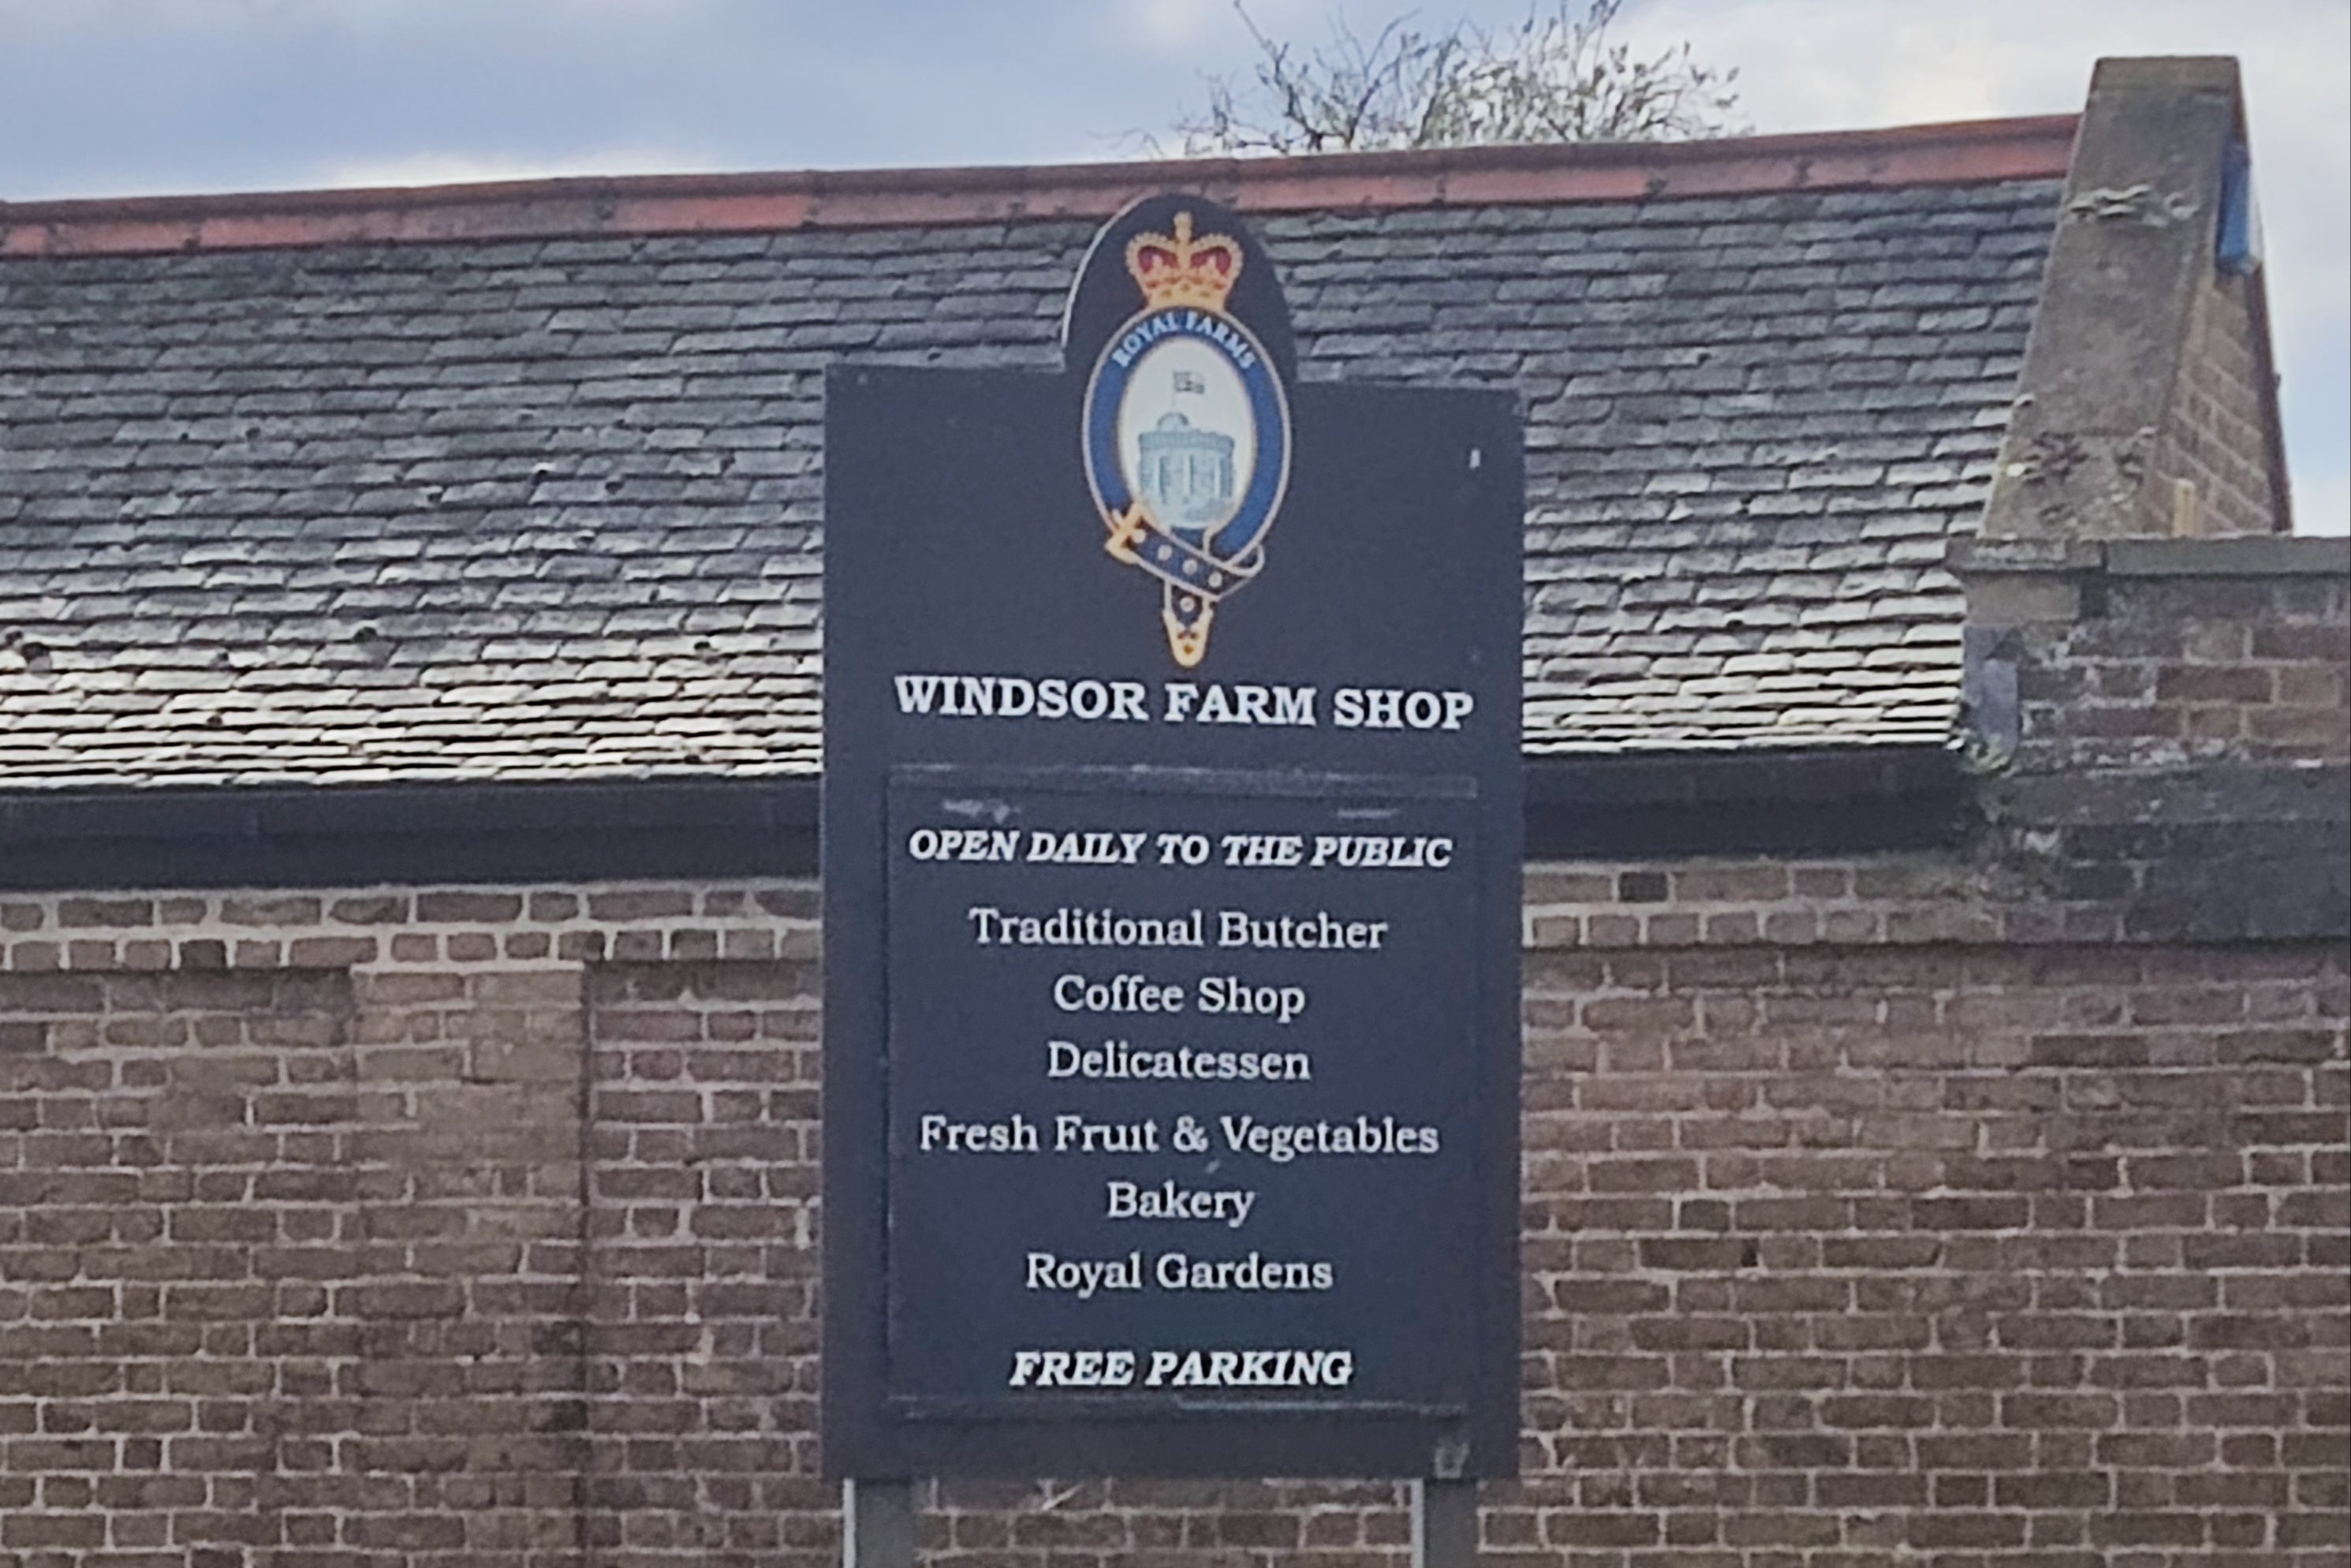 Windsor Farm Shop is open to the public - and the occasional royal shopper or two